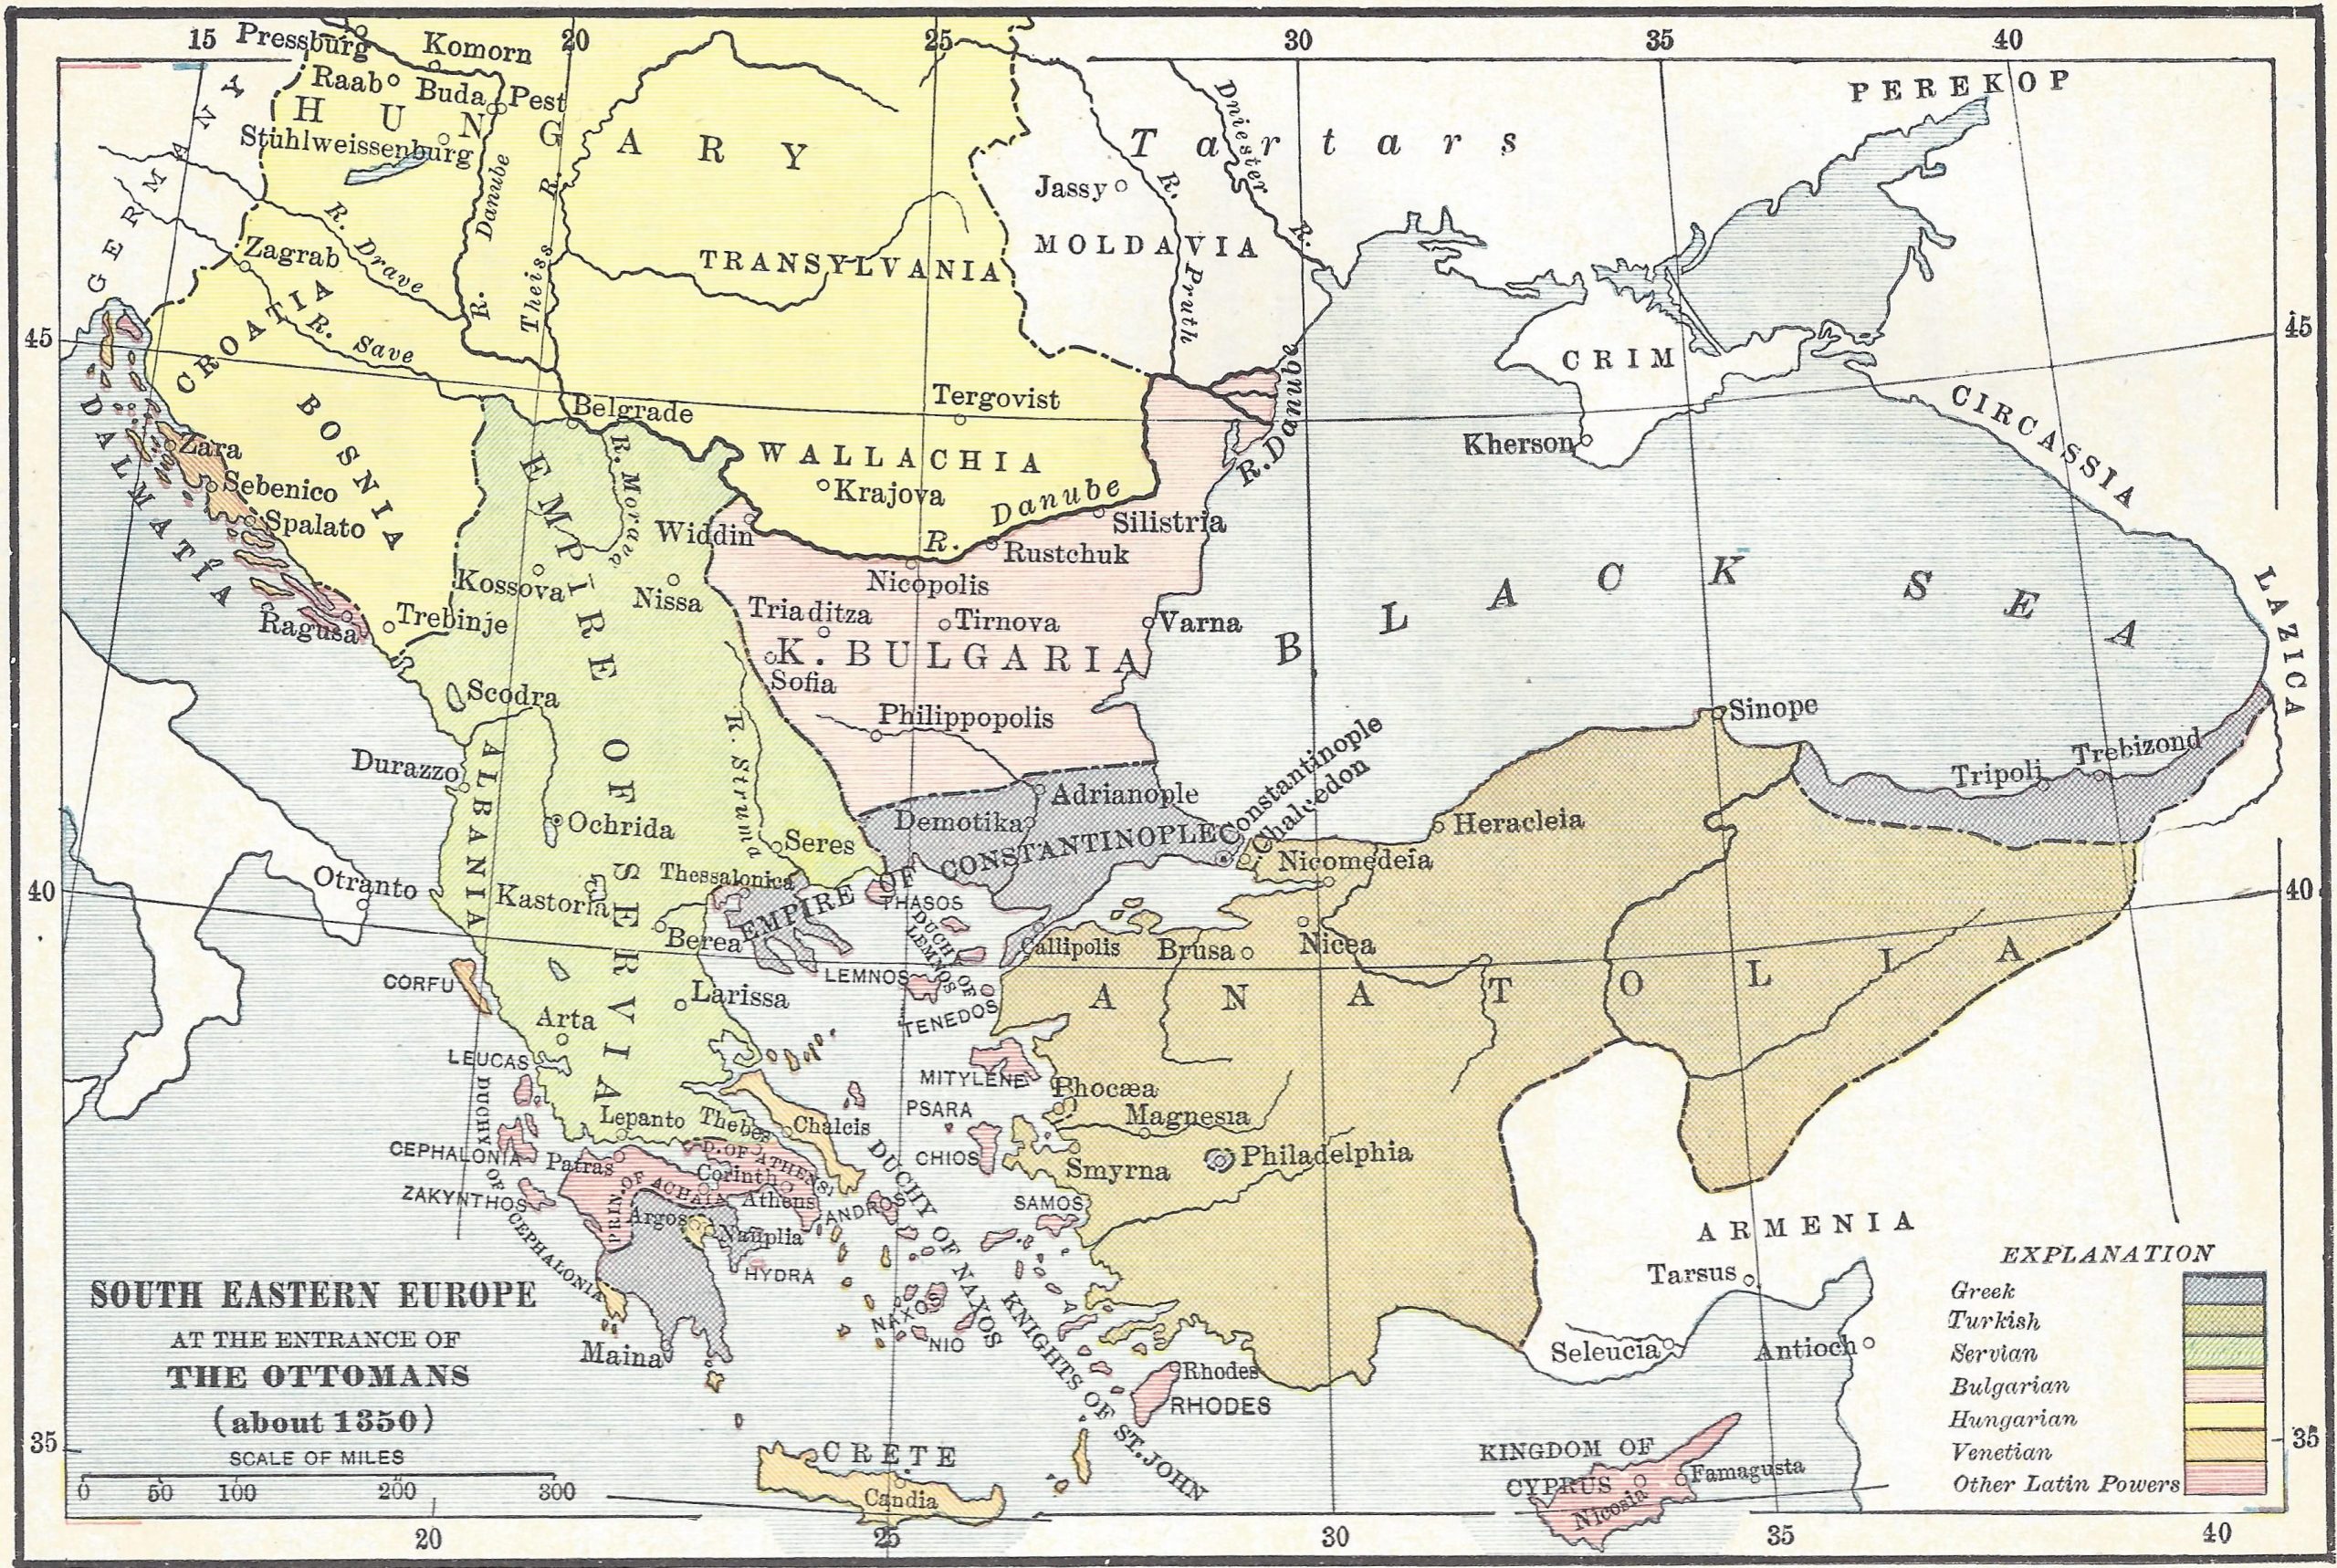 South Eastern Europe at the Entrance of the Ottomans (about 1350)